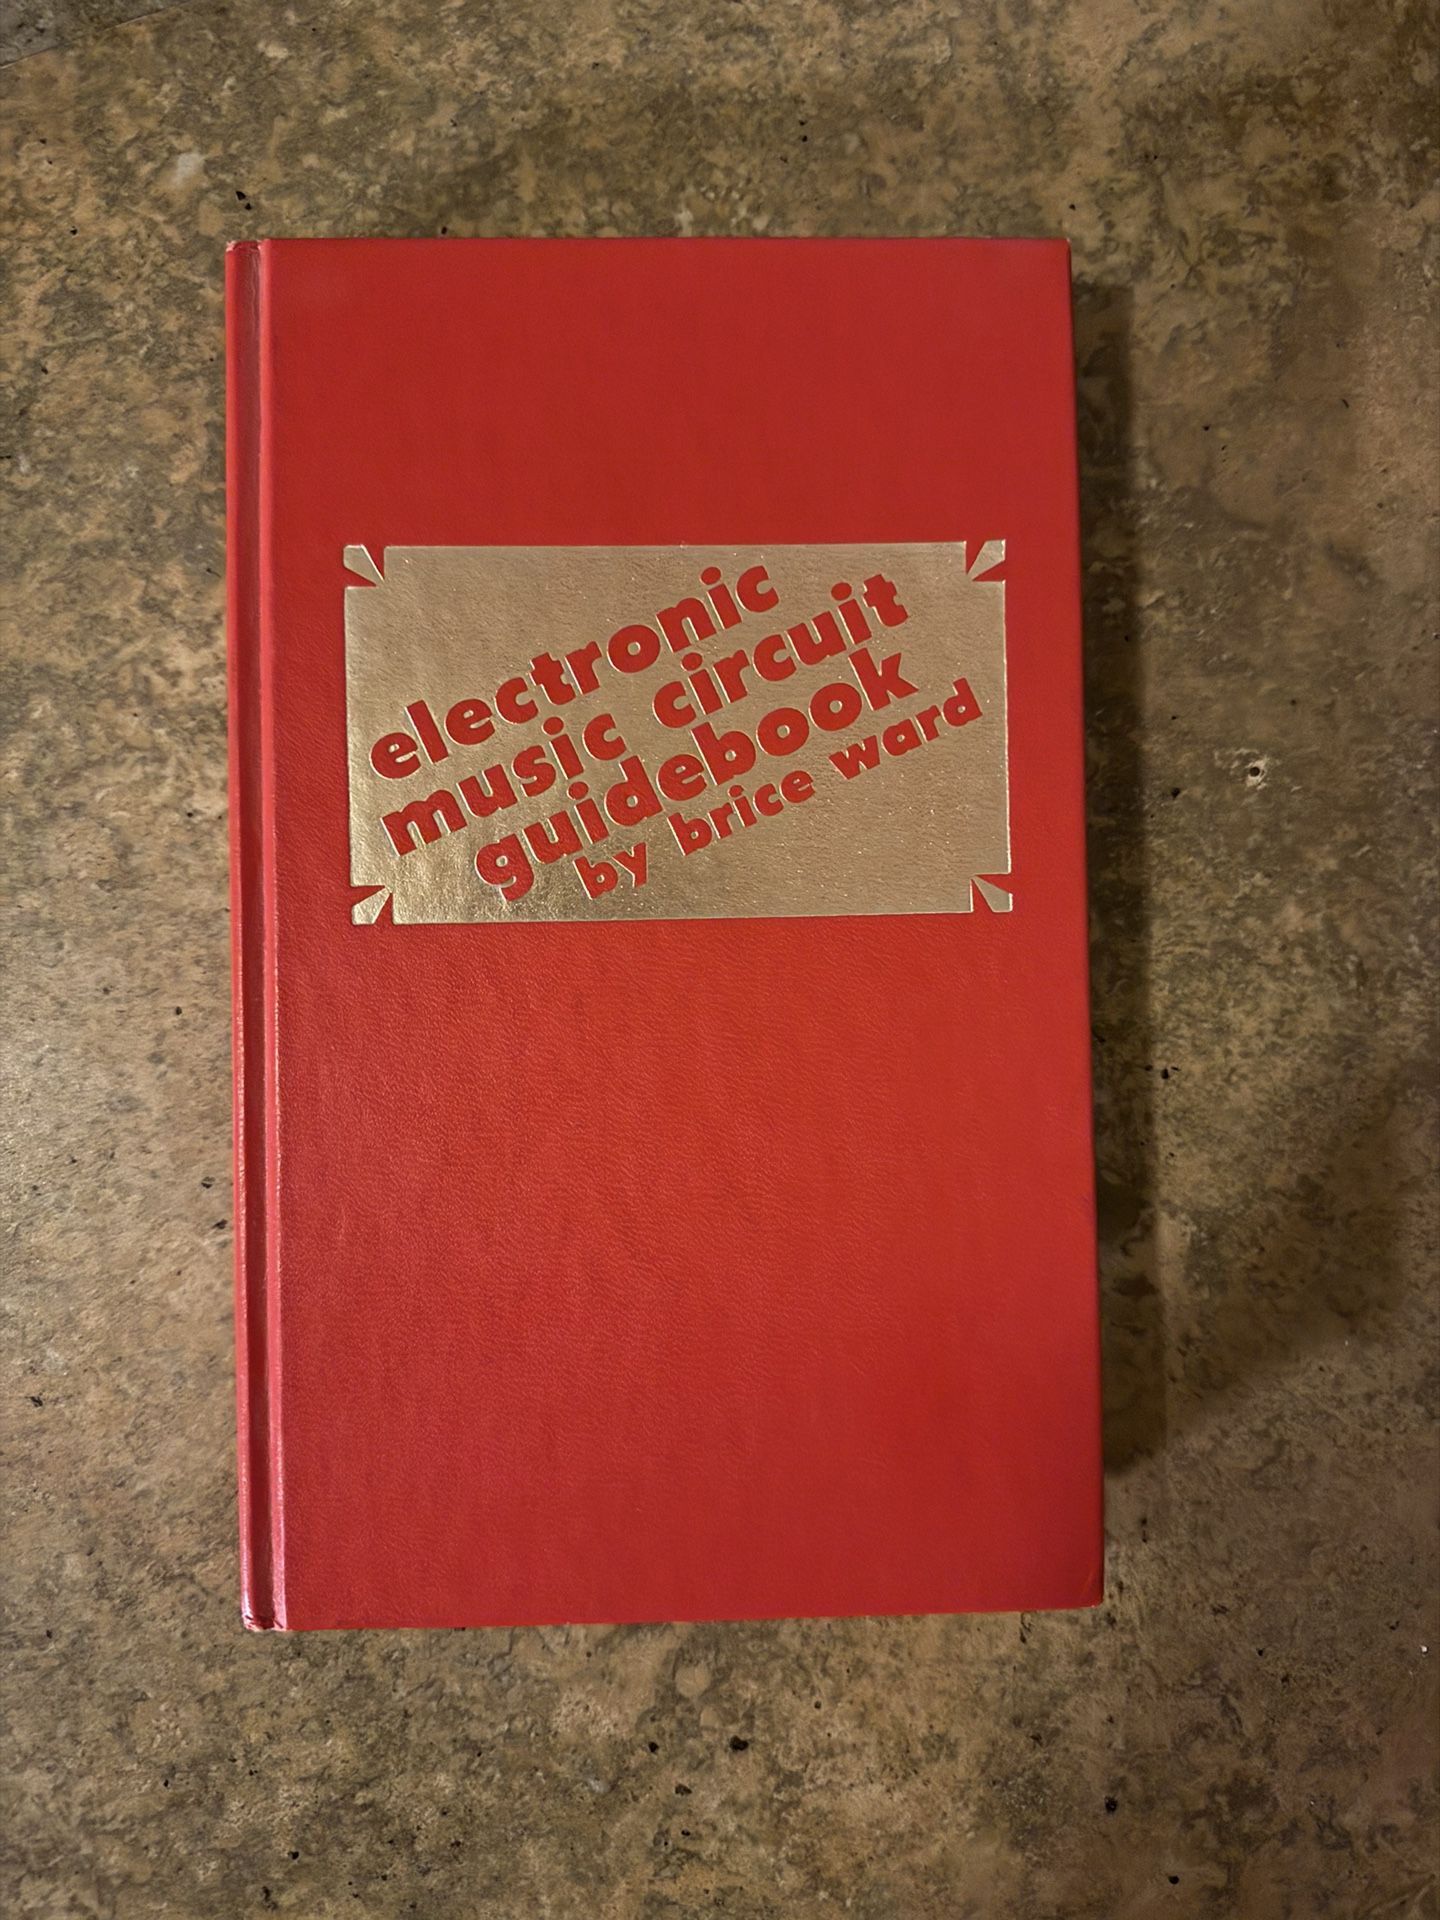 Electronic music circuit Guidebook 1st Edition (Rare)